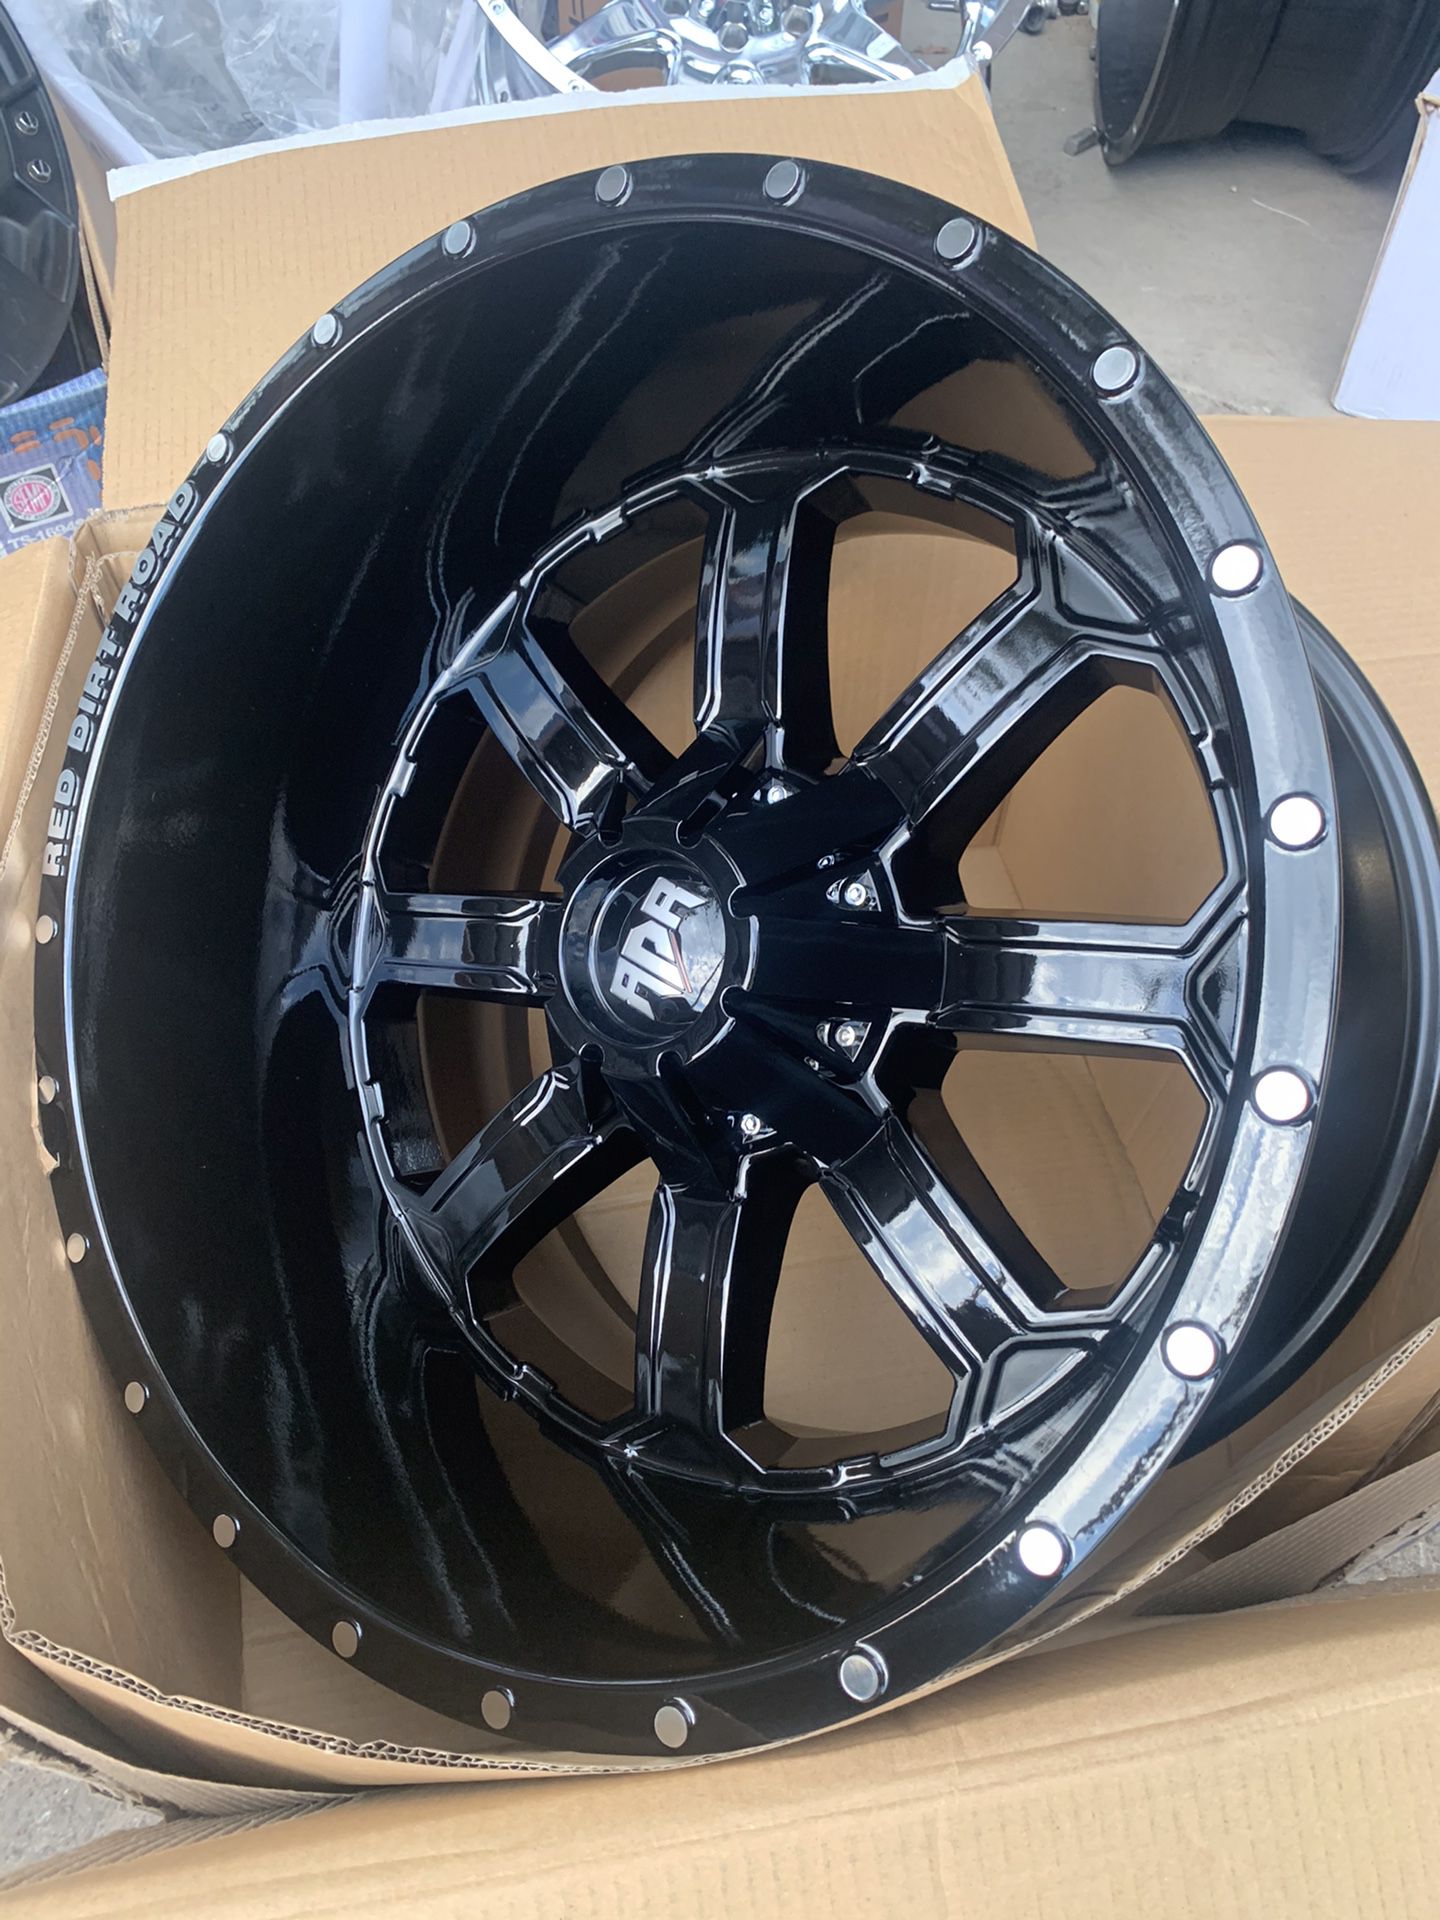 Brand new 20x12 Black RDR Rims 20” off road Wheels 20 Rines (Rims Only, No tires) available in any bolt pattern 5 , 6 , 8 lug ! F150 Super duty F250